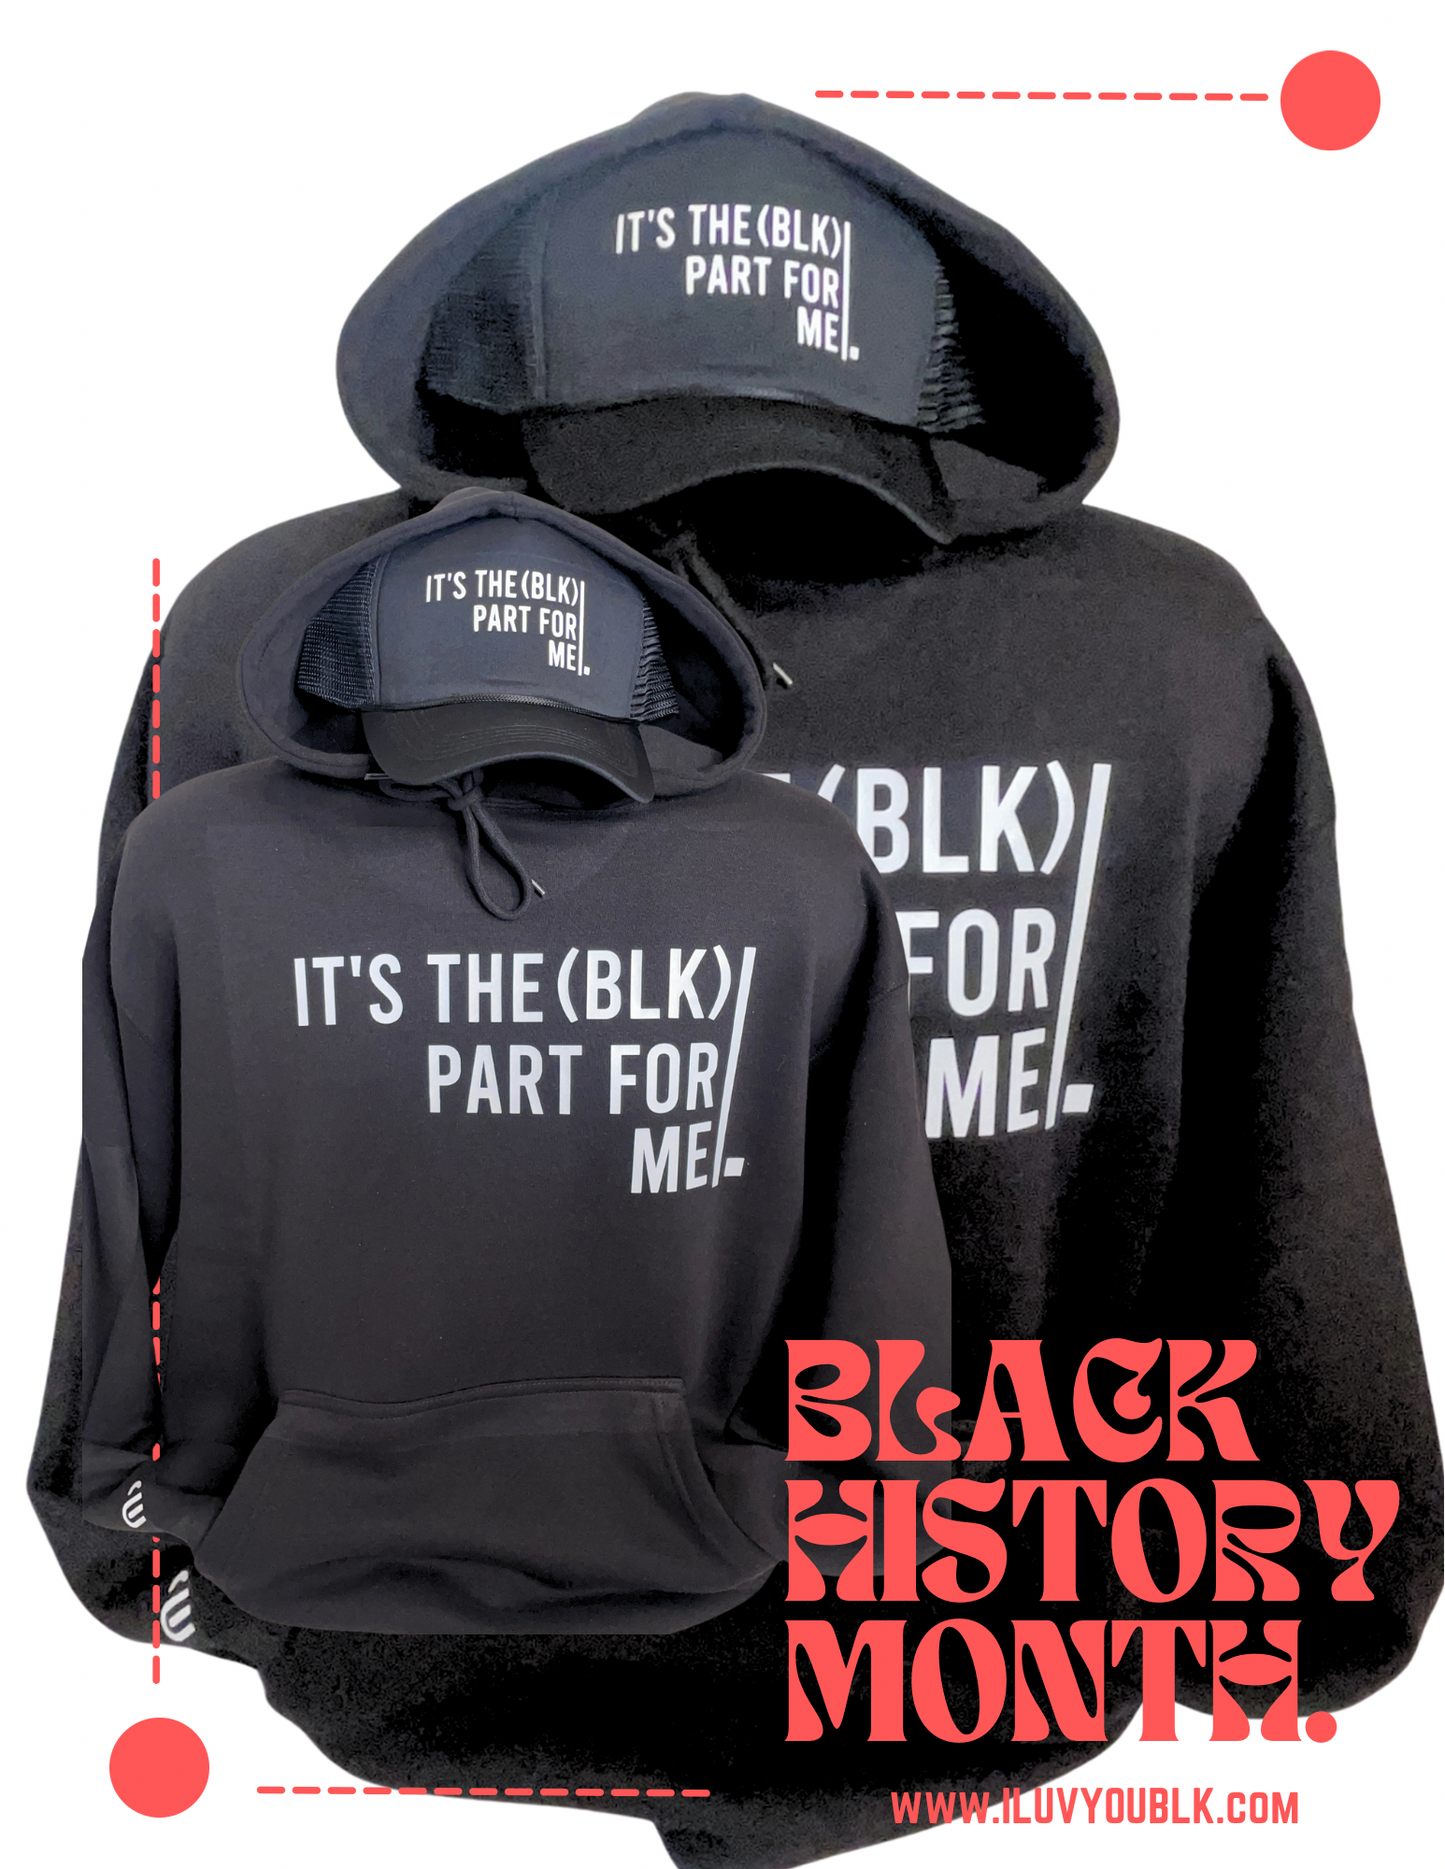 IT’S THE (BLK) PART FOR ME - Hoodie